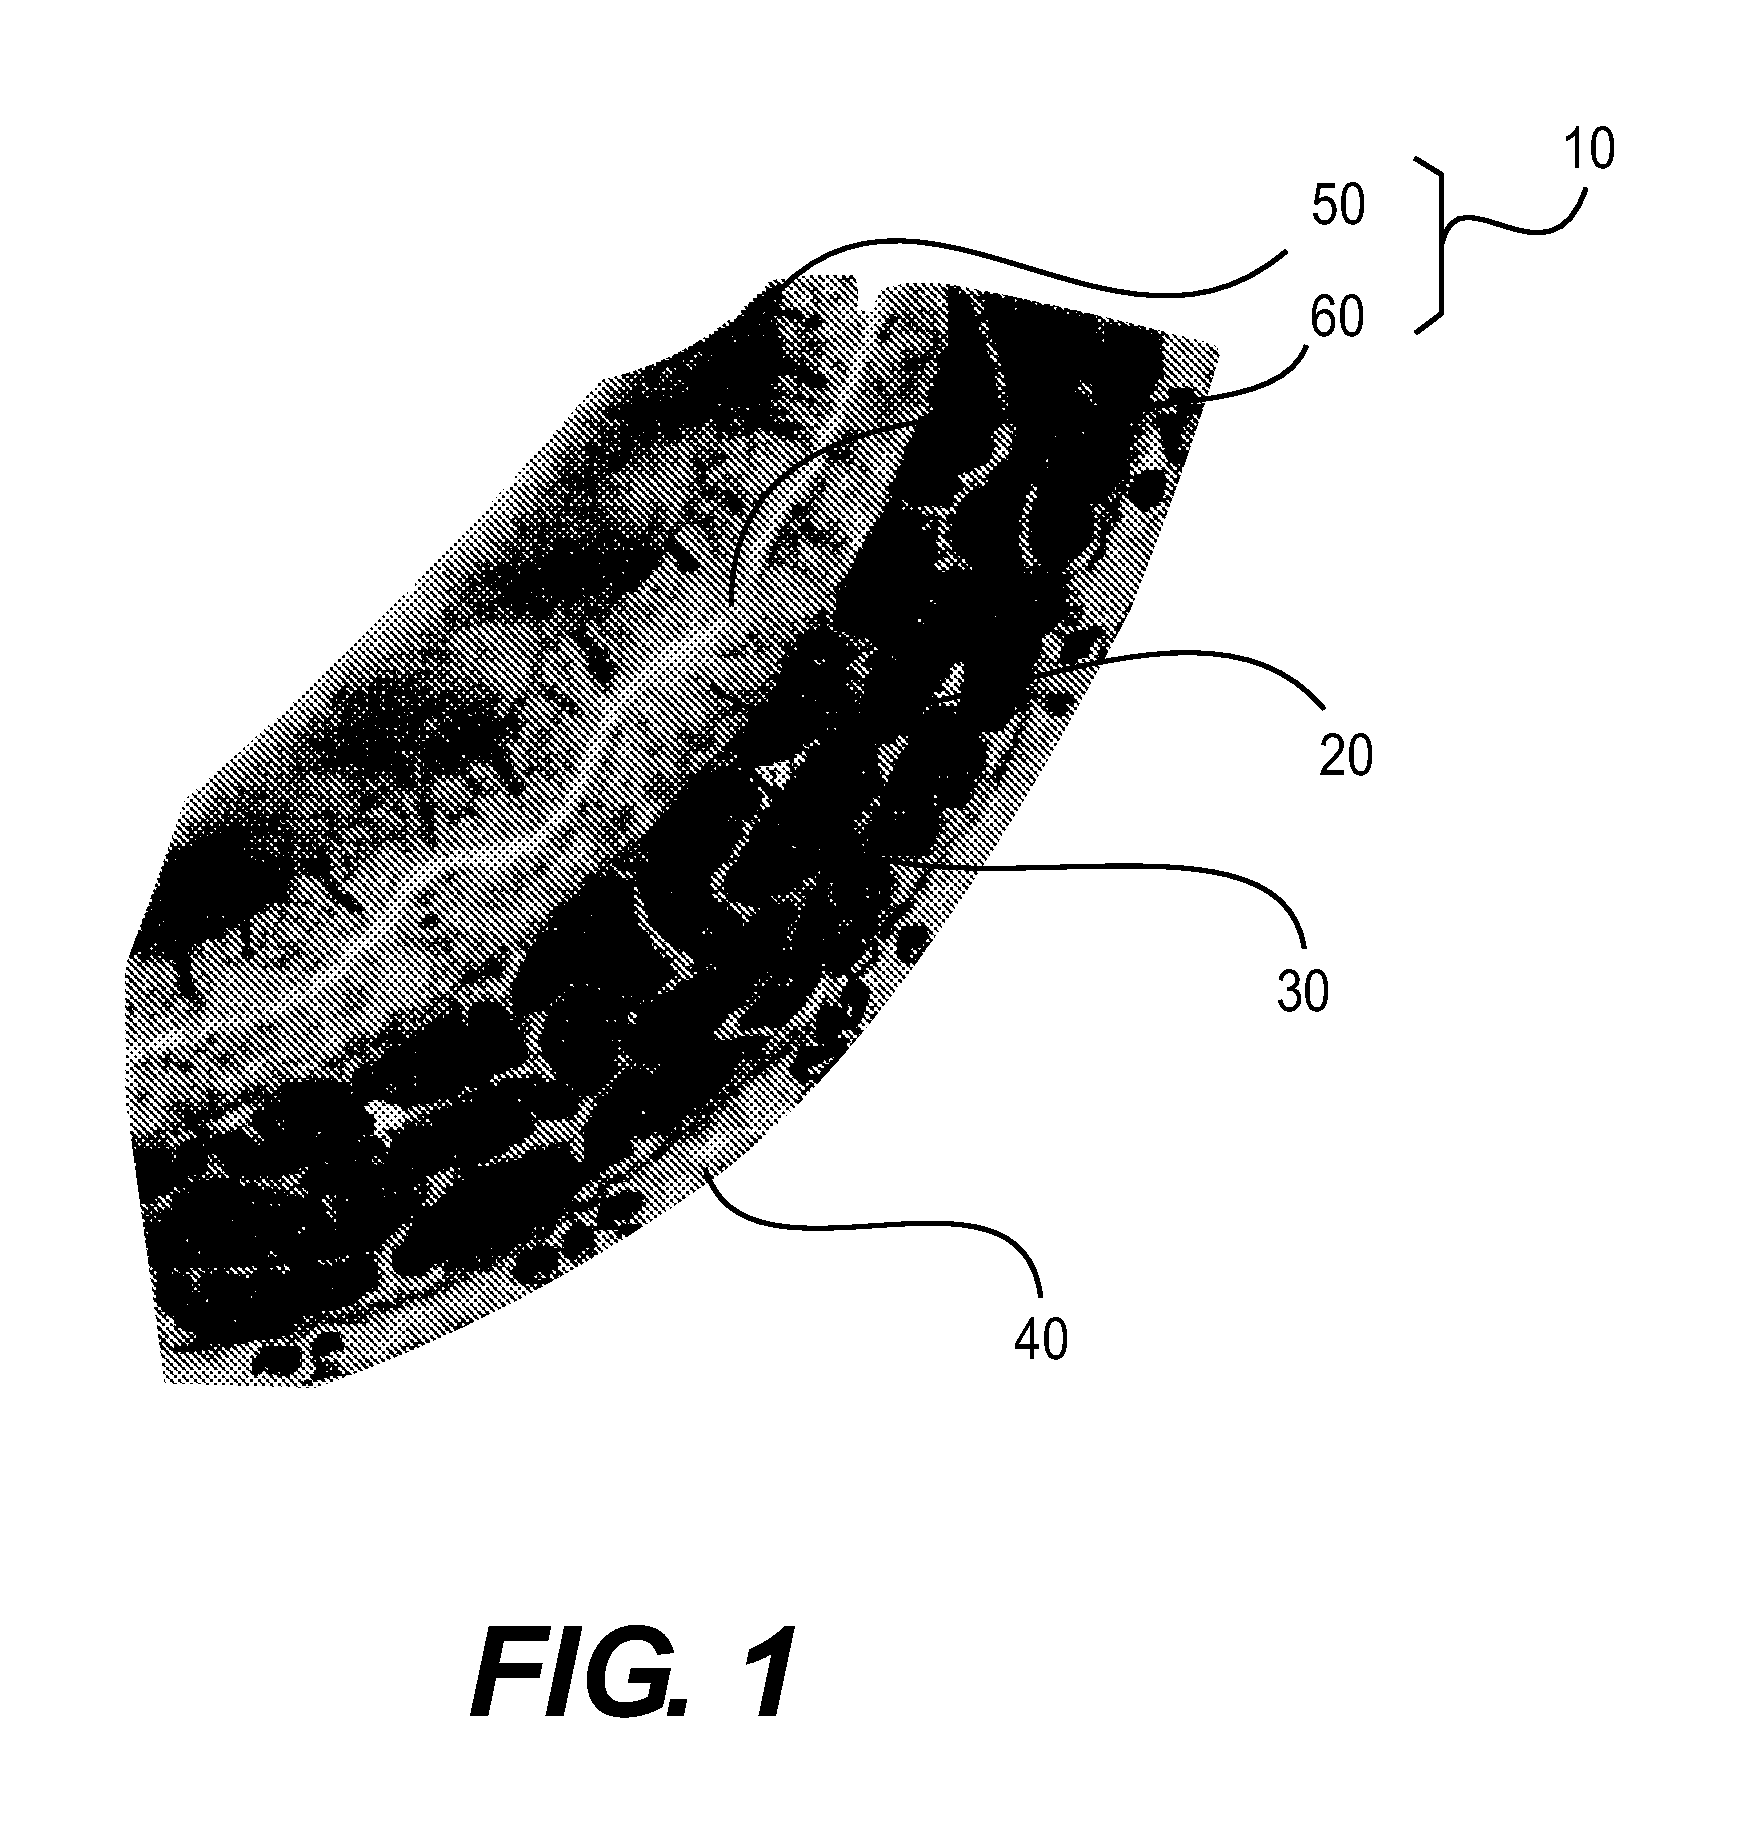 Apparatus for treating an organ and related methods of use